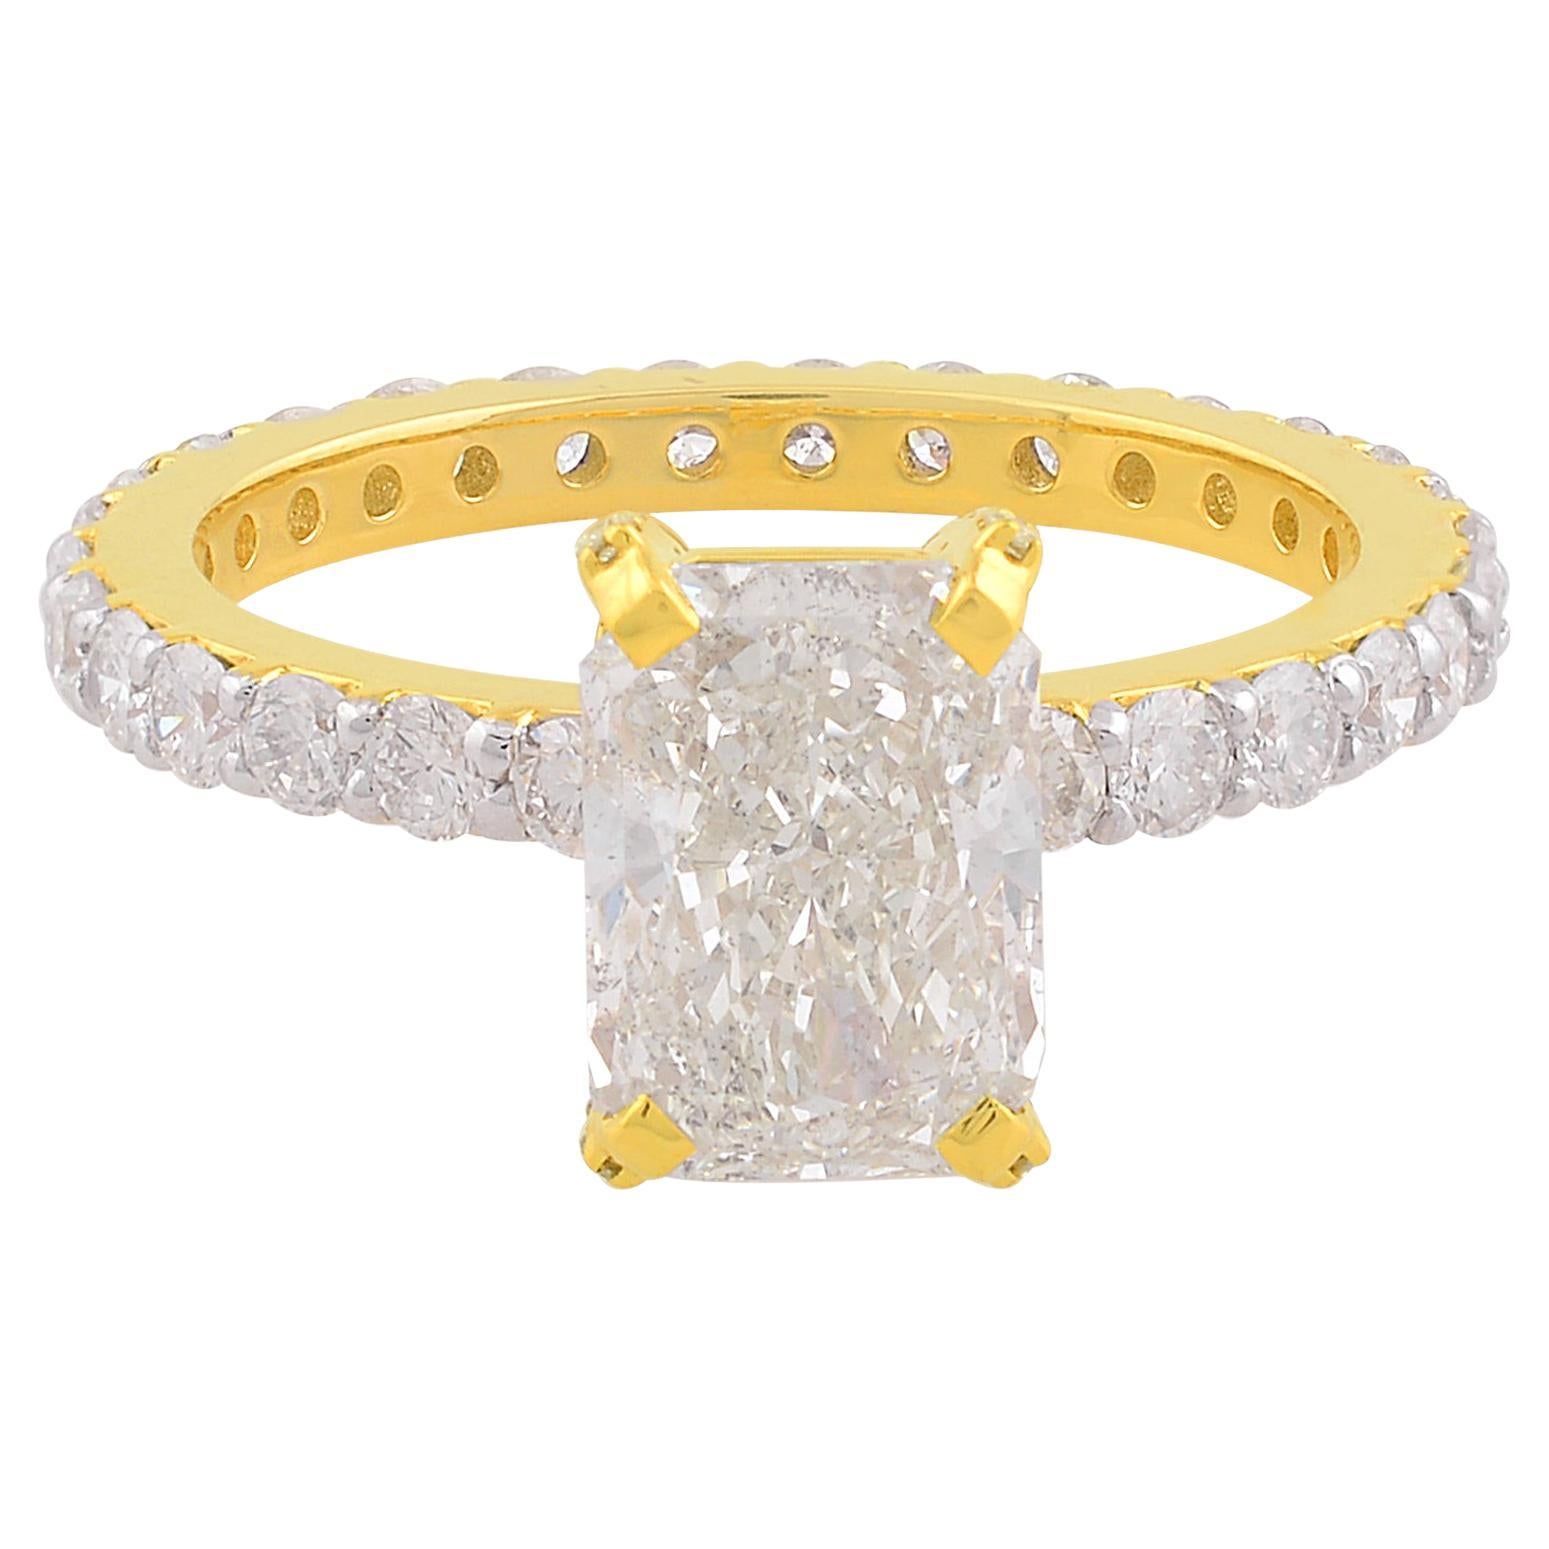 SI Clarity HI Color Solitaire Diamond Band Ring 18 Karat Yellow Gold Jewelry